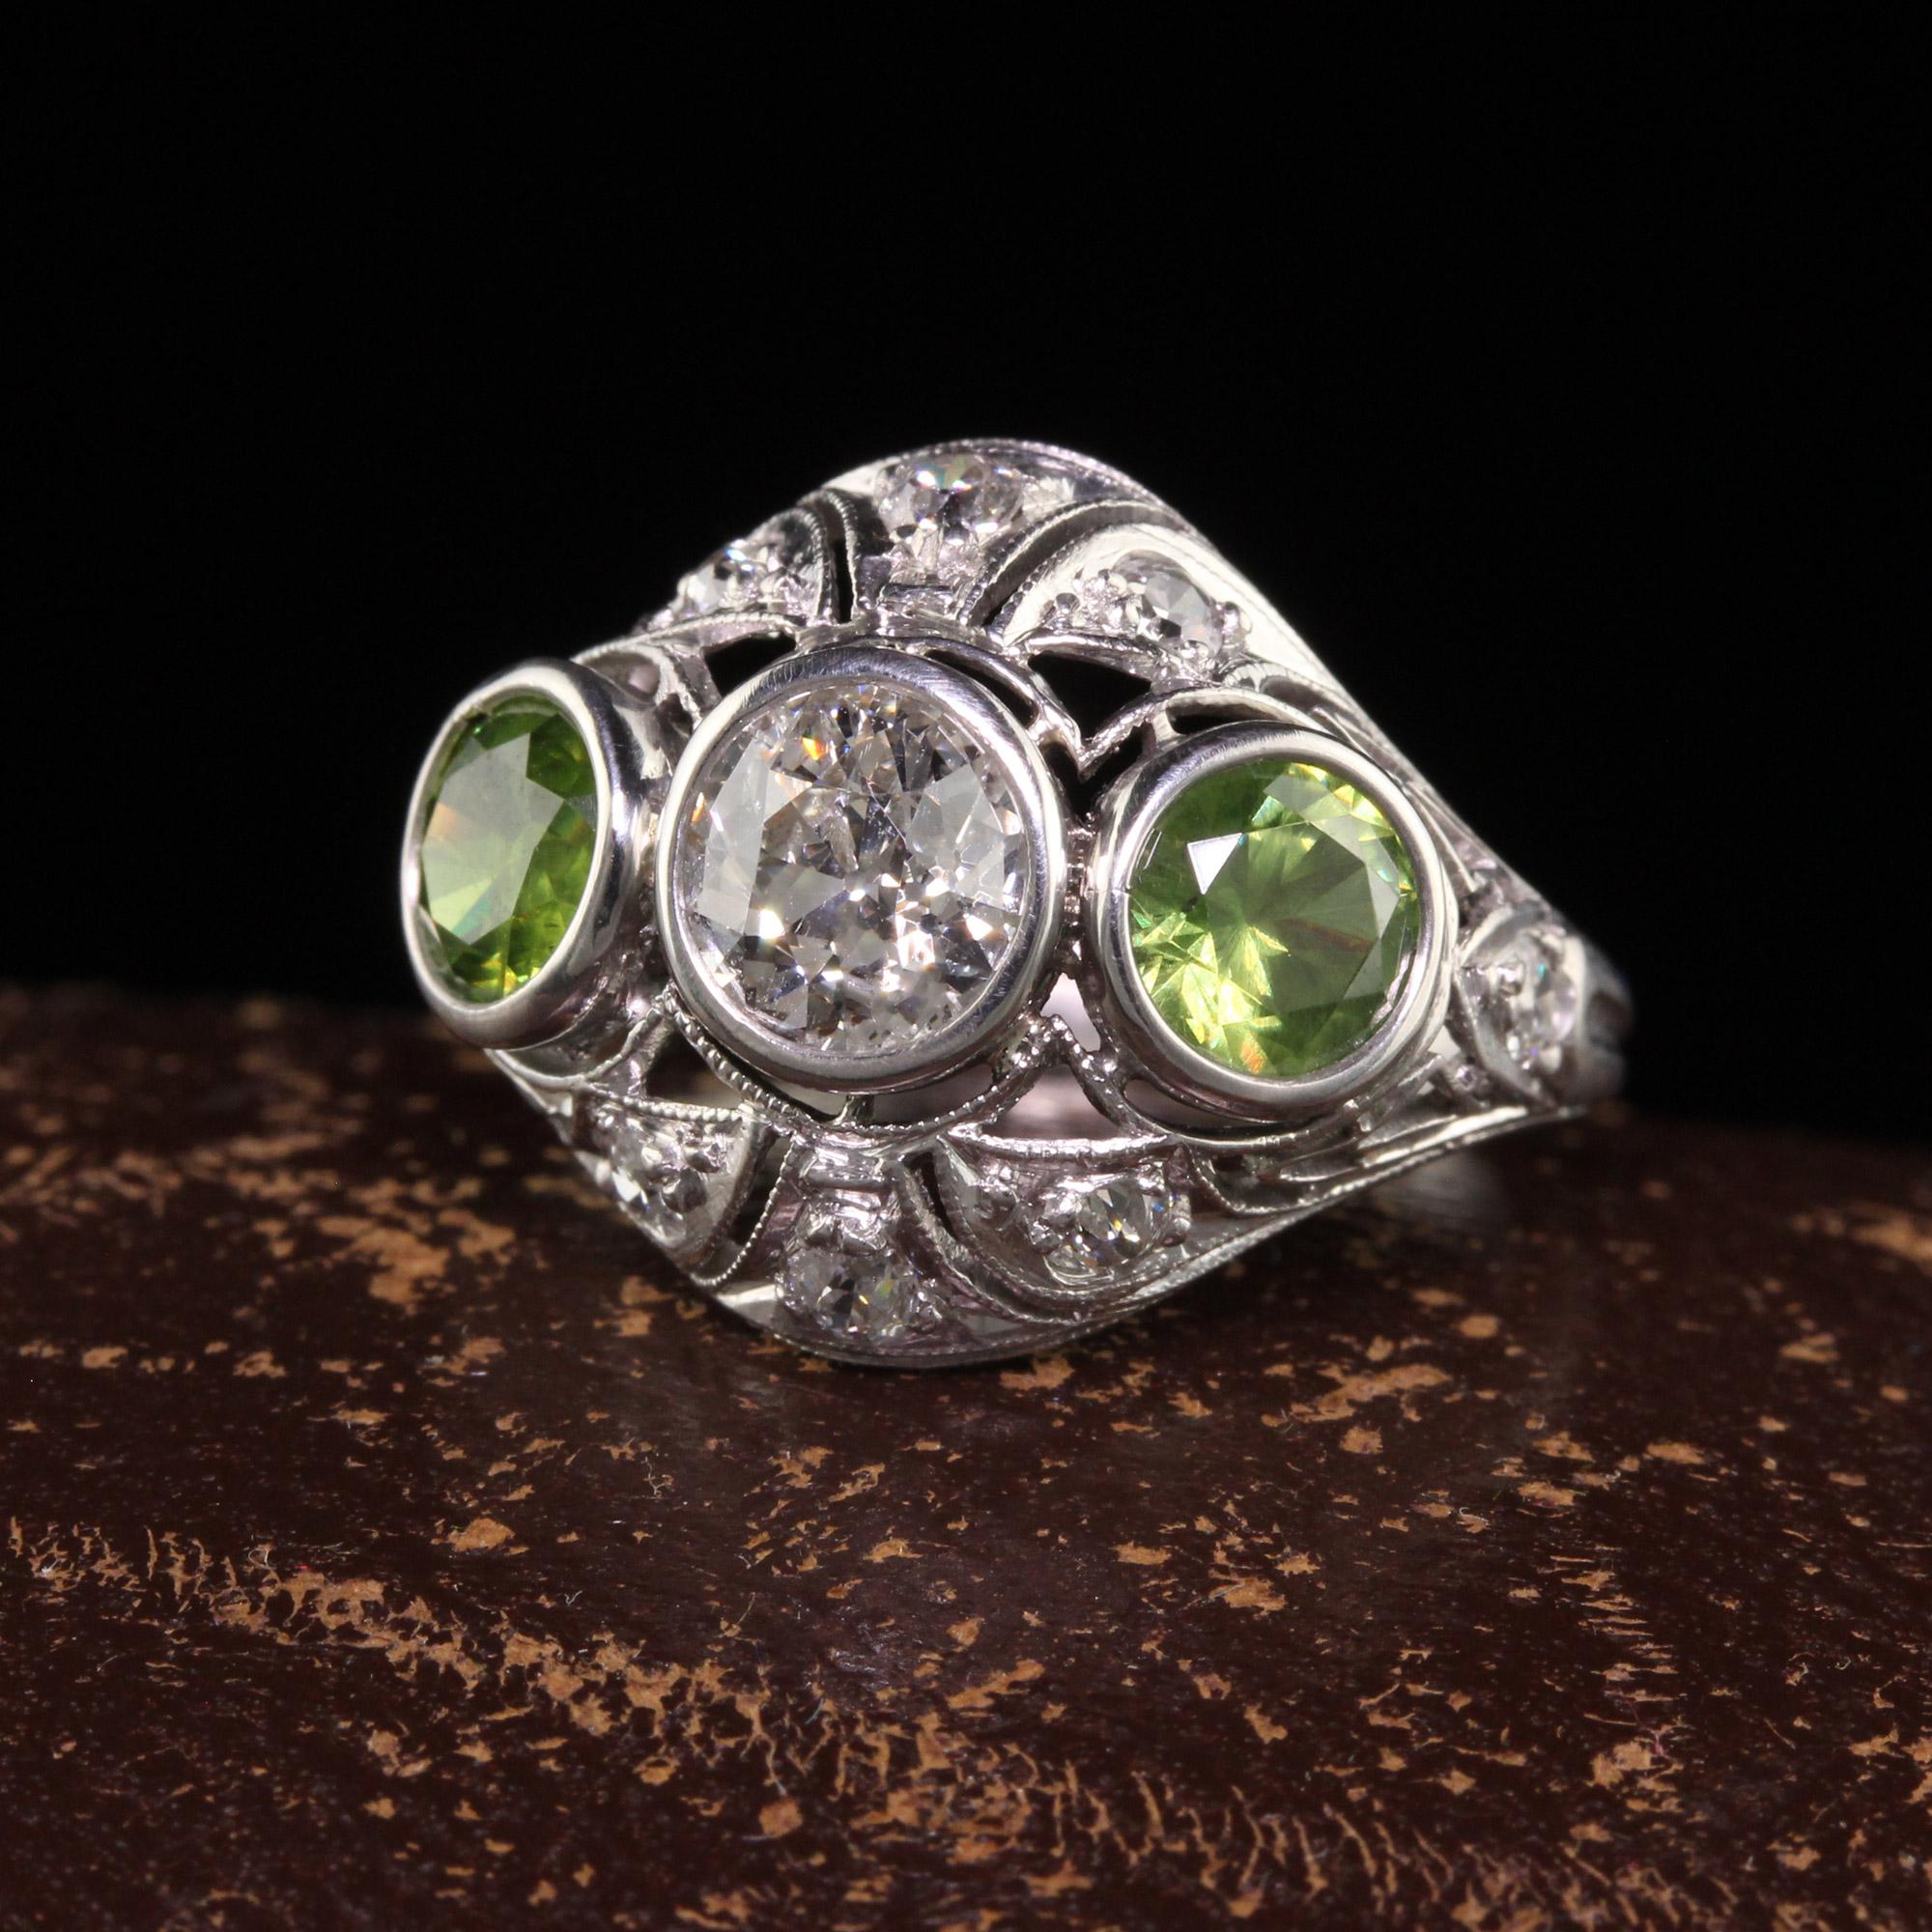 Beautiful Antique Art Deco Platinum Demantoid Garnet and Diamond Three Stone Ring. This incredible three stone ring is crafted in platinum. The ring holds two natural demantoid garnets with beautiful horsetail inclusions and an old mine diamond in